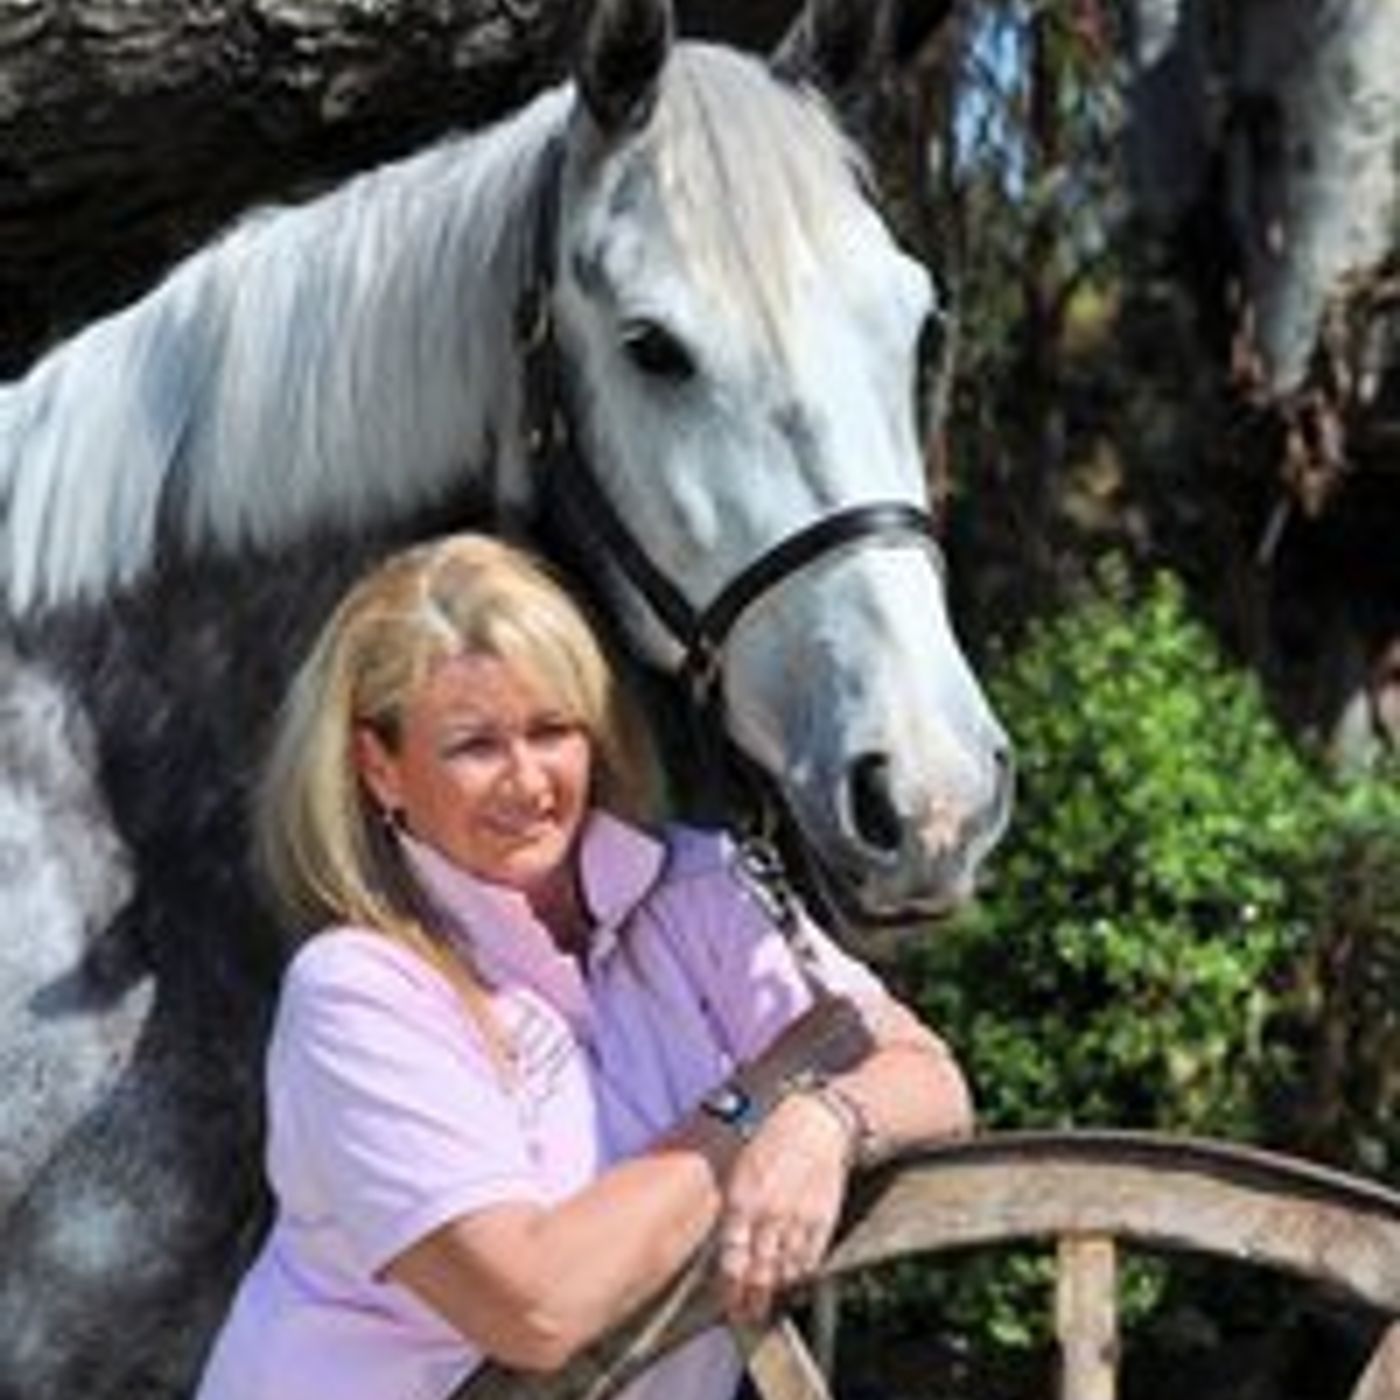 HorseSense Episode 12 - Overcoming self-doubt, fear and insecurity with Sandi Simons